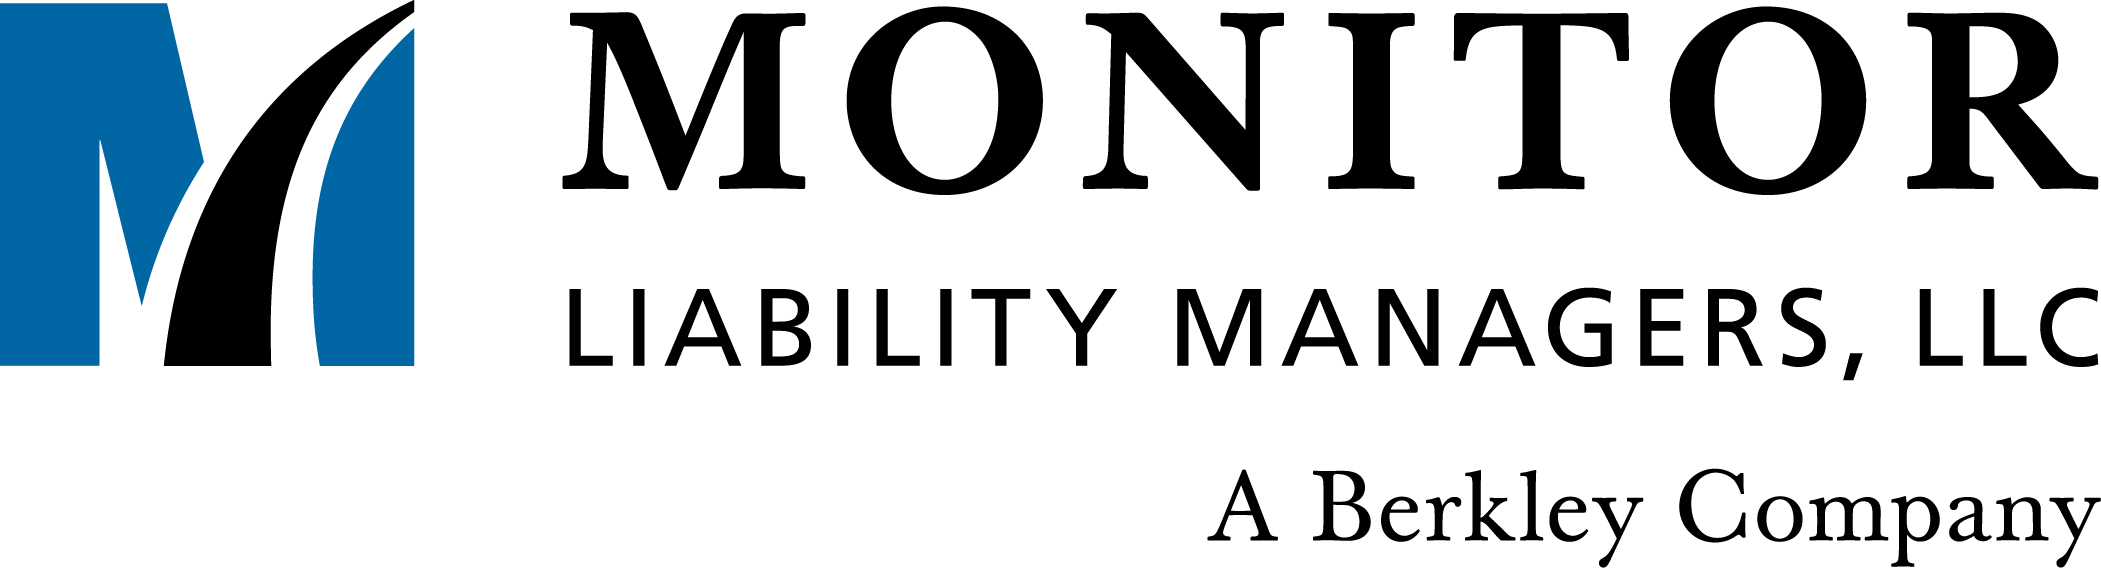 Monitor Liability Managers, Inc. Logo